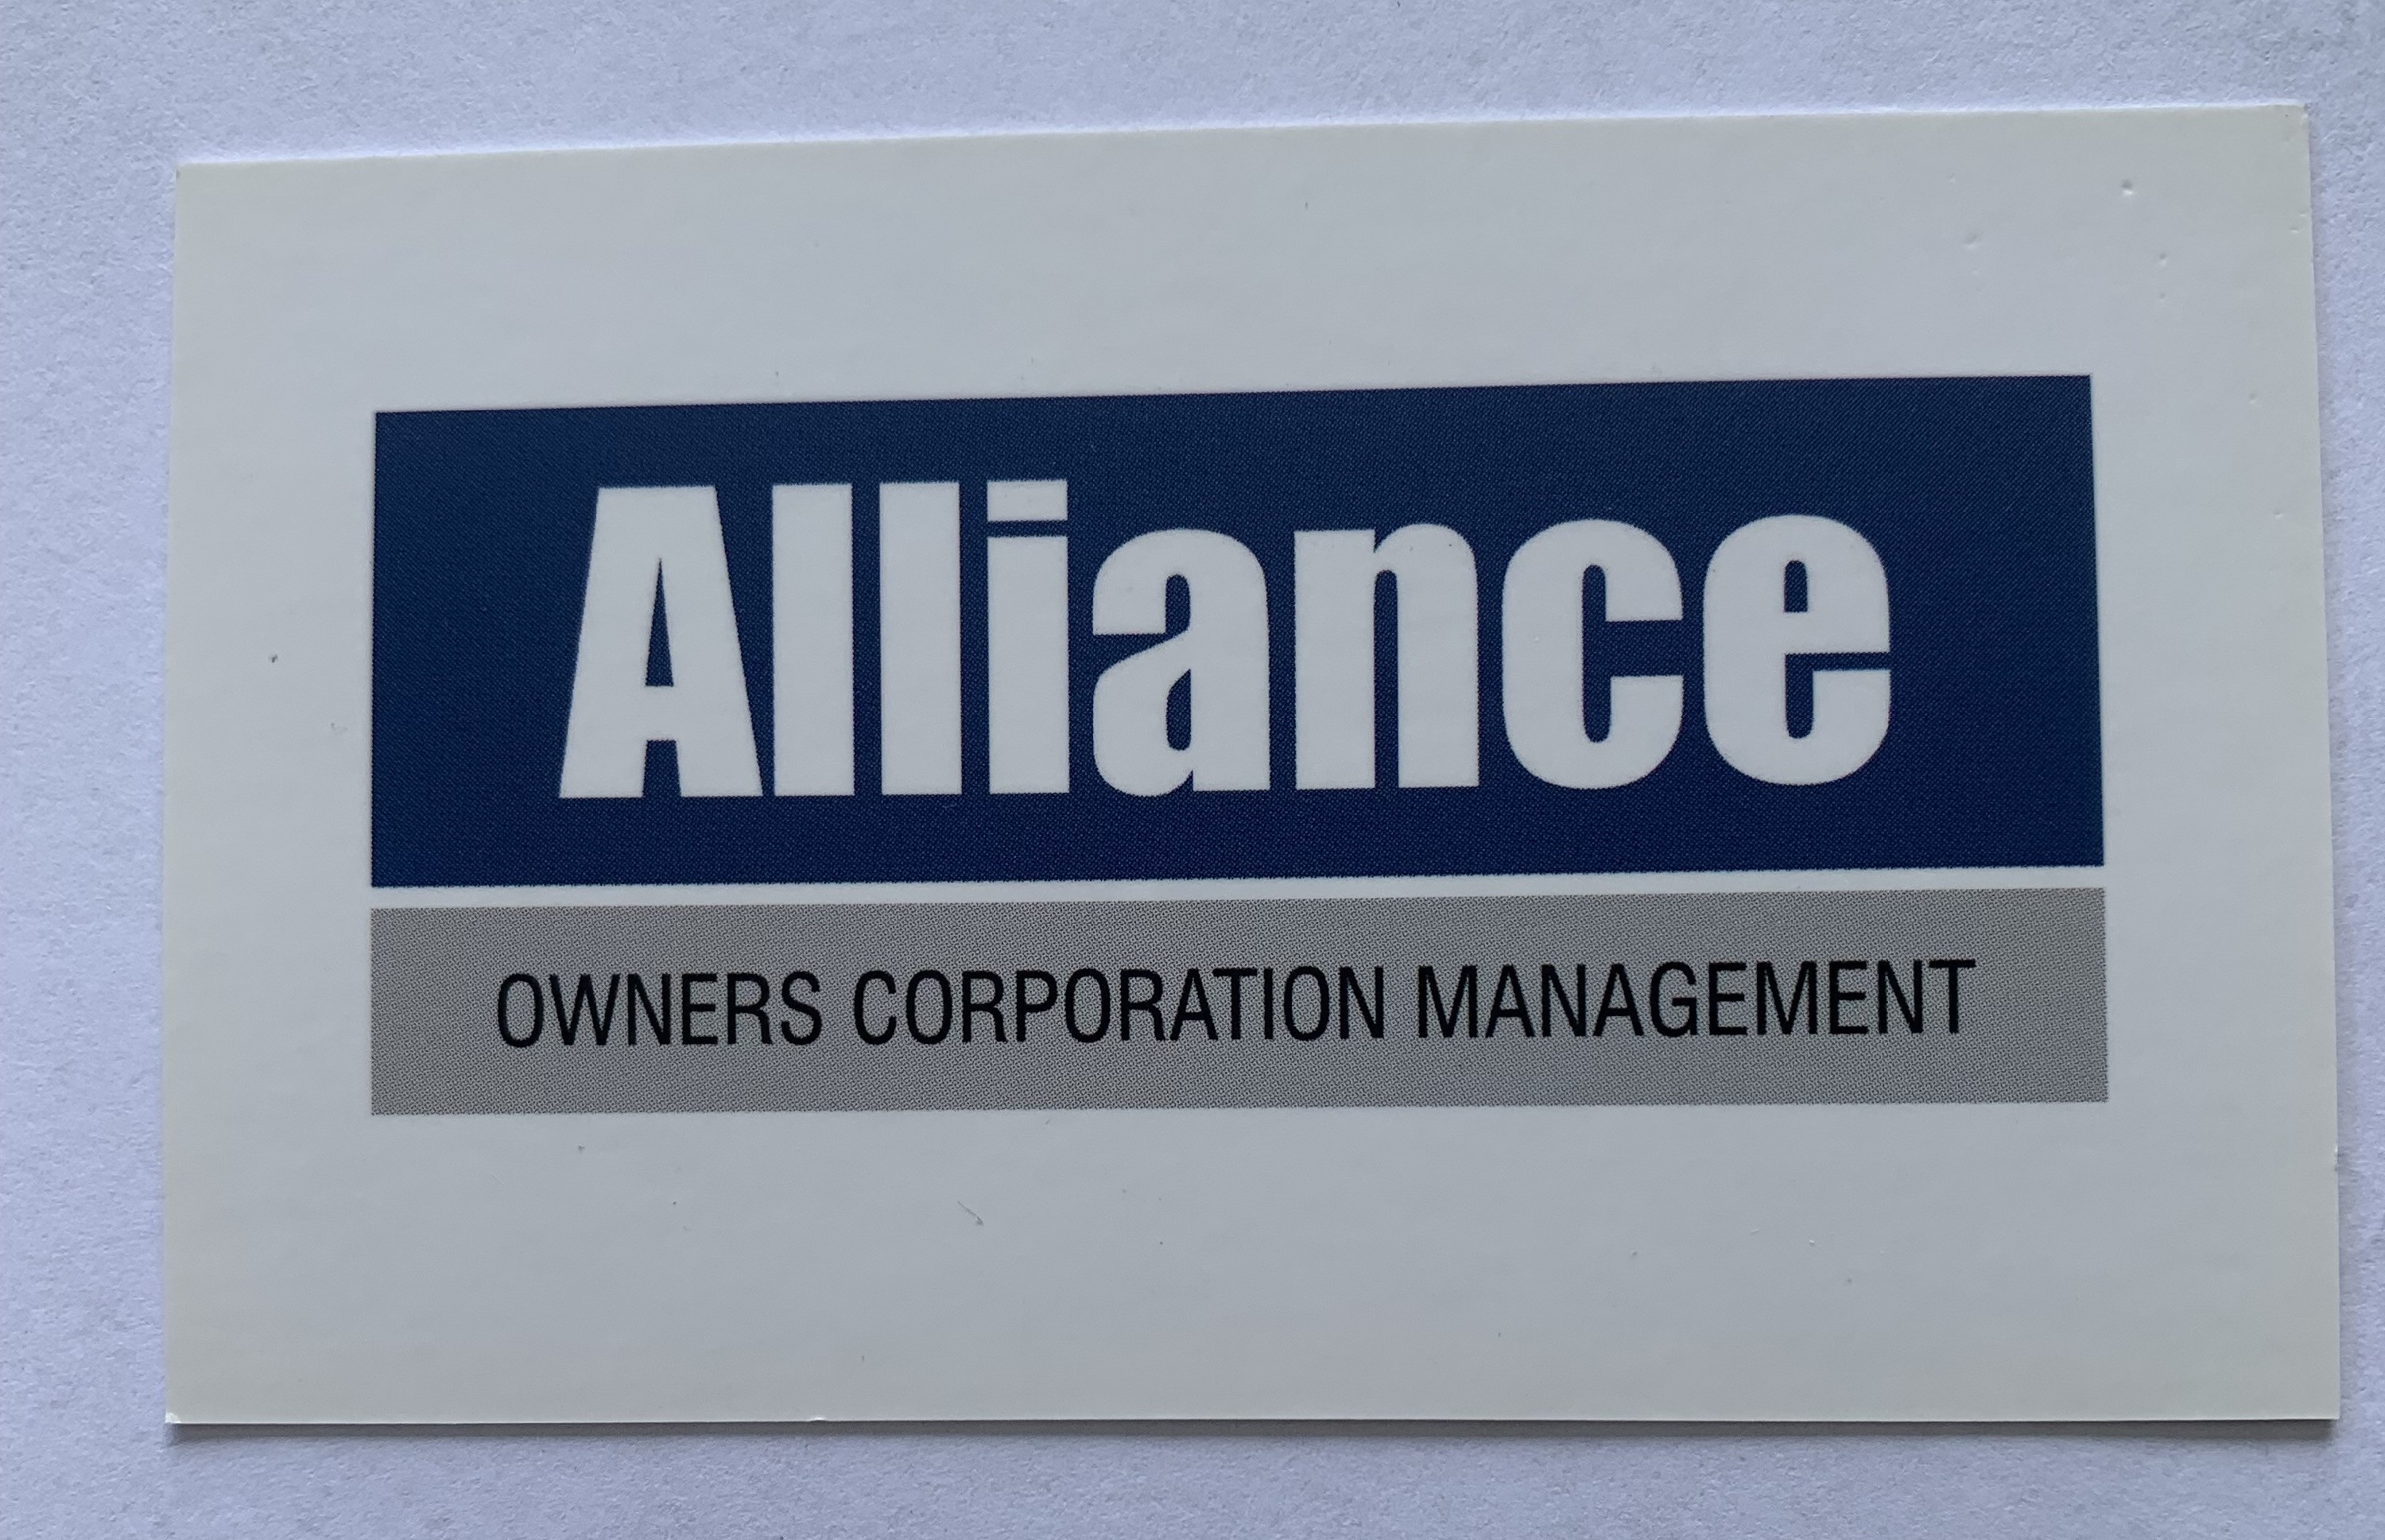 Owners Corporation Management Business in...Business For Sale